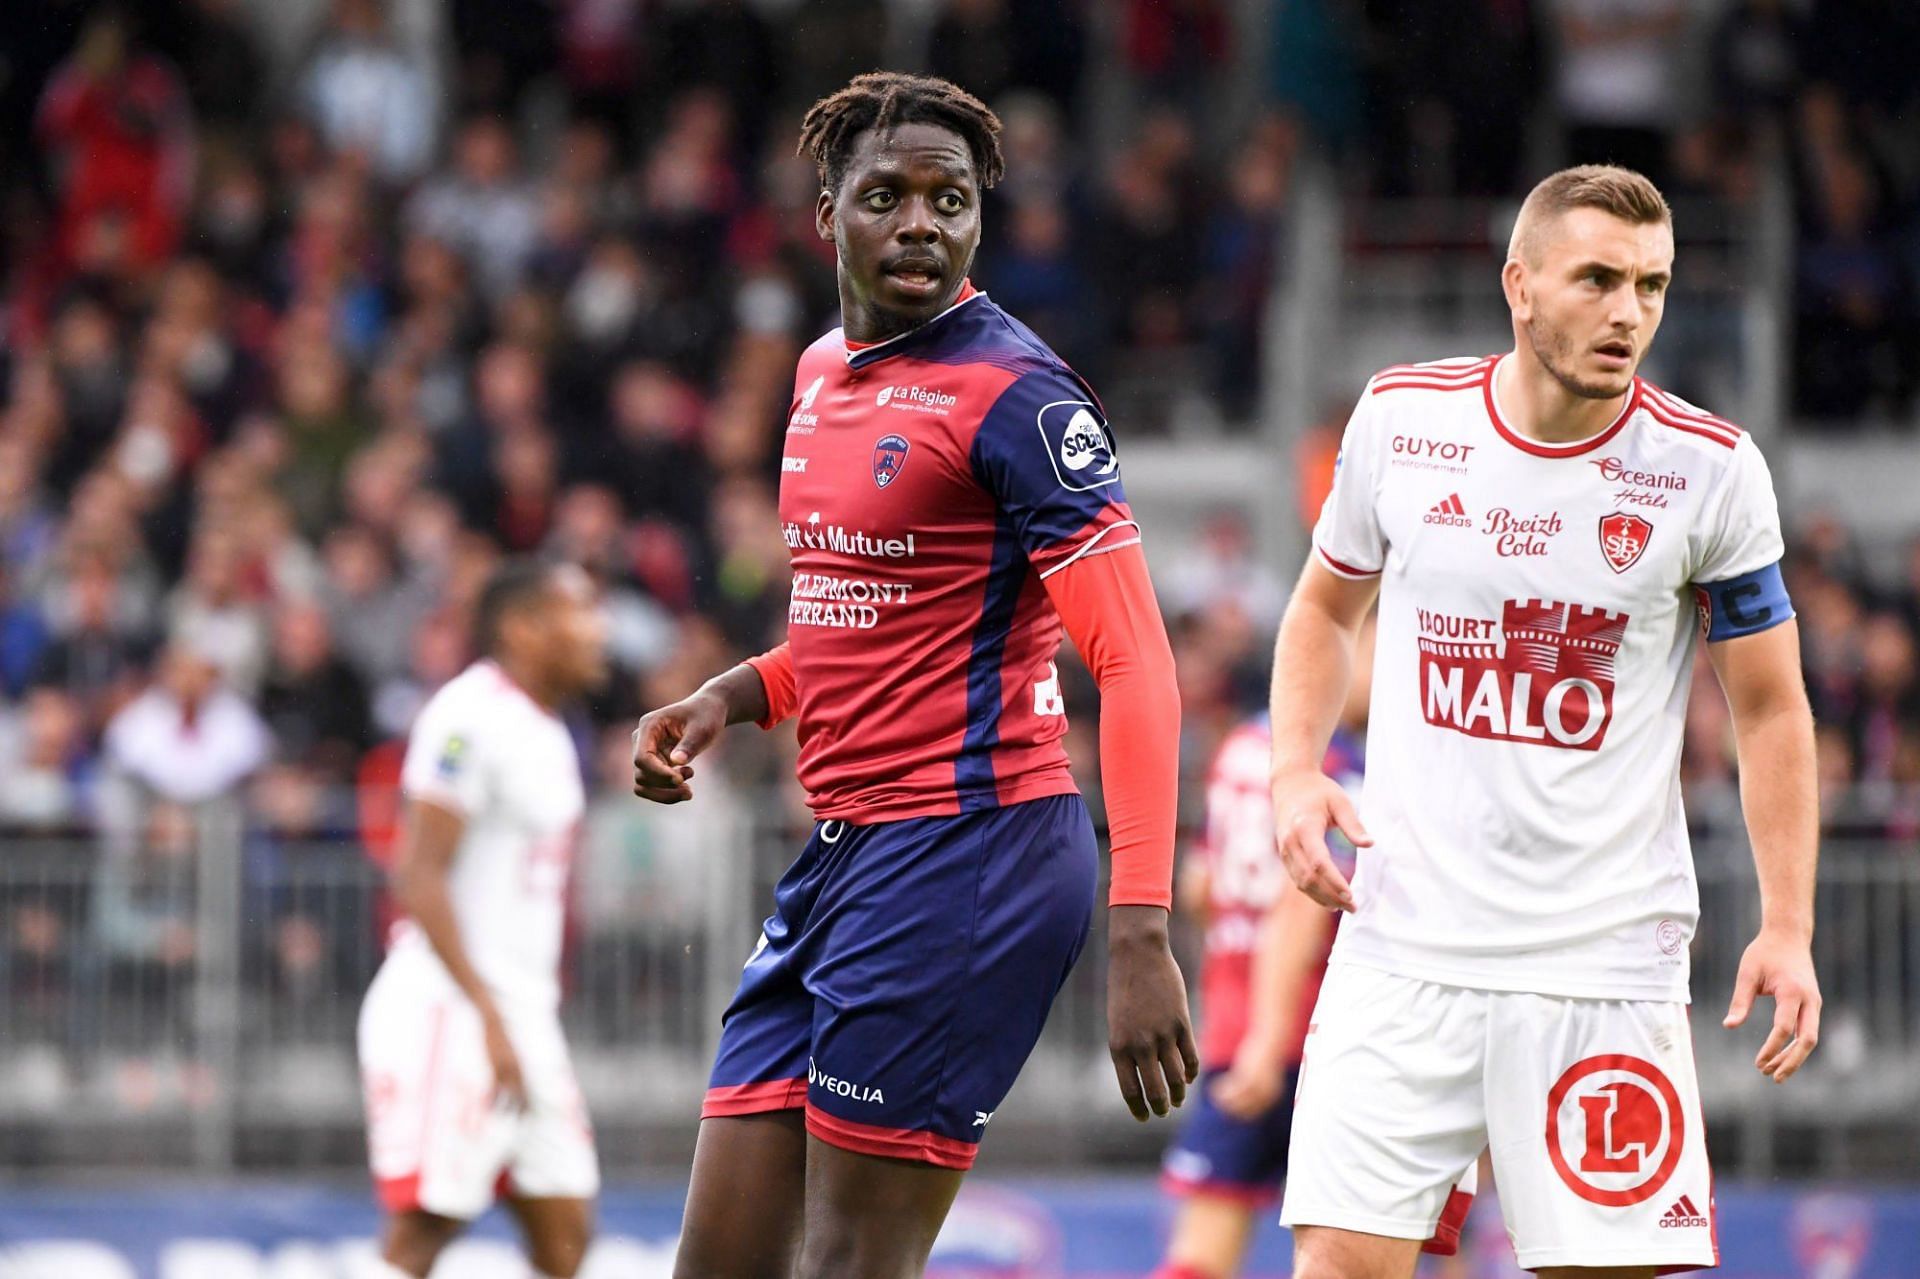 Clermont Foot will face Stade Reims in Ligue 1 on Sunday.